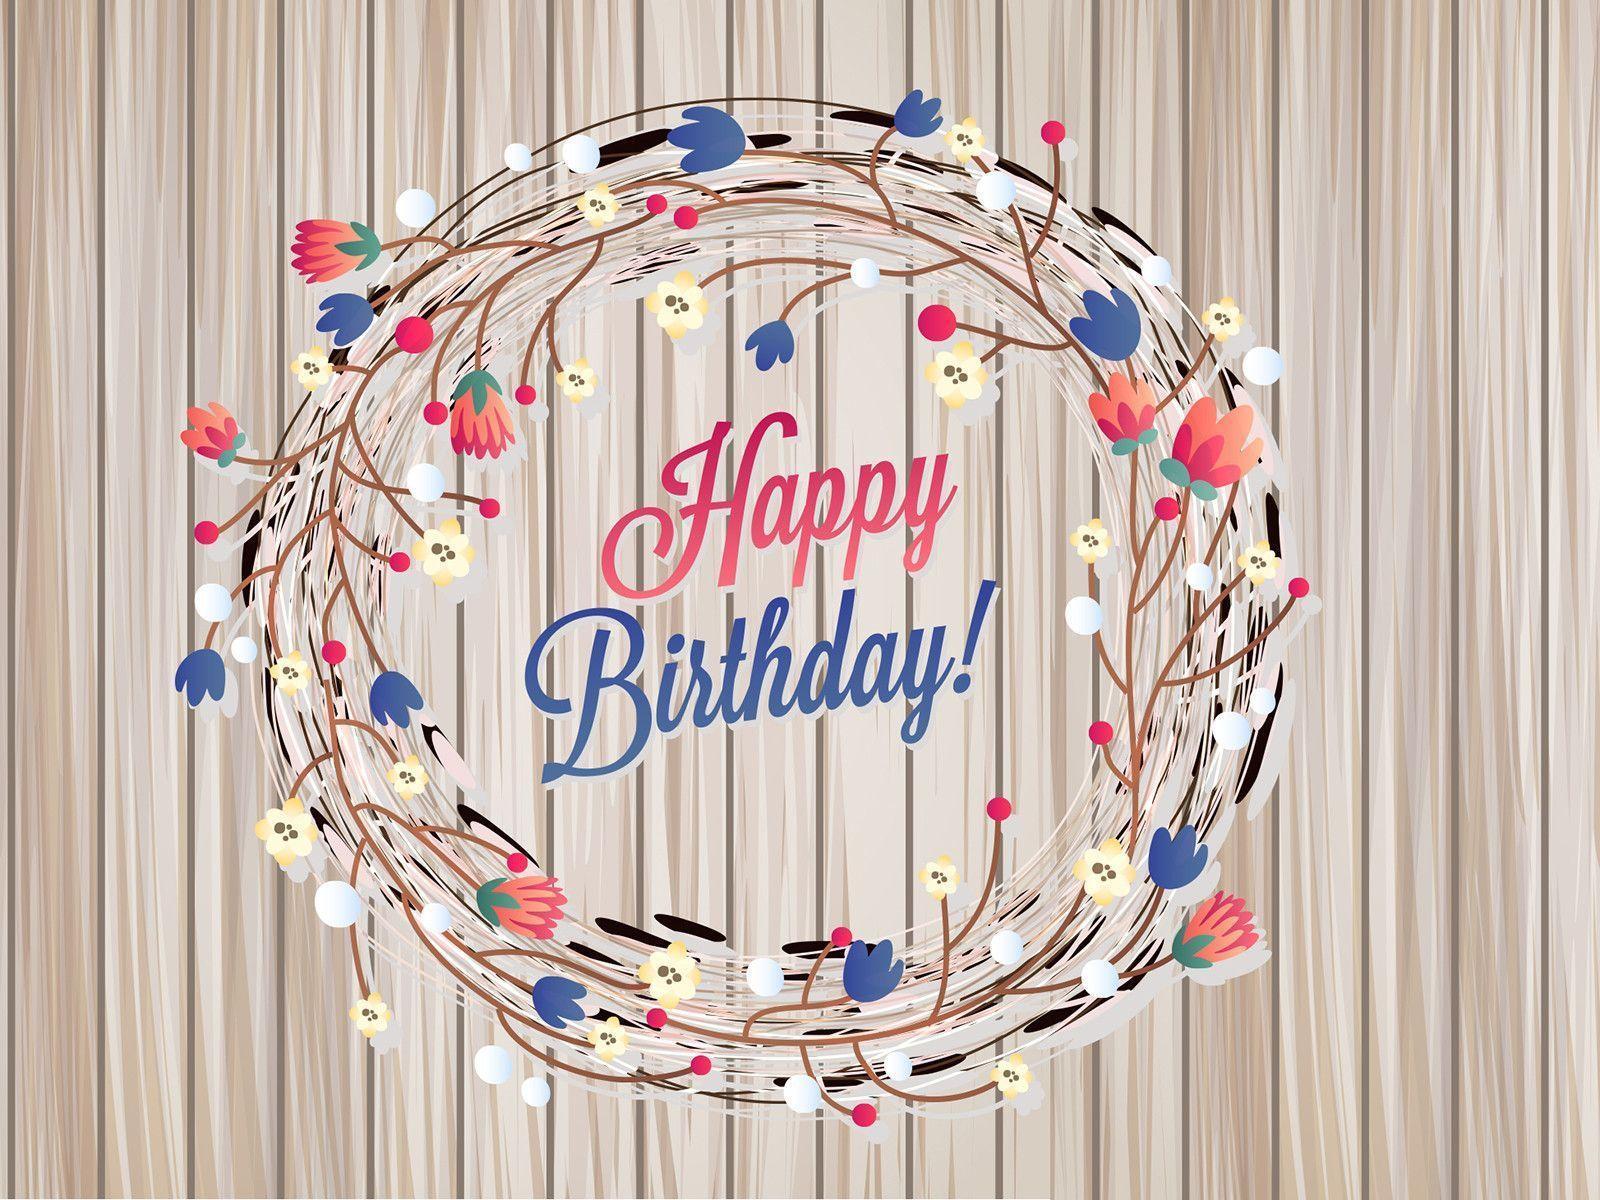 Floral birthday card PPT Background, Cartoon, Holiday